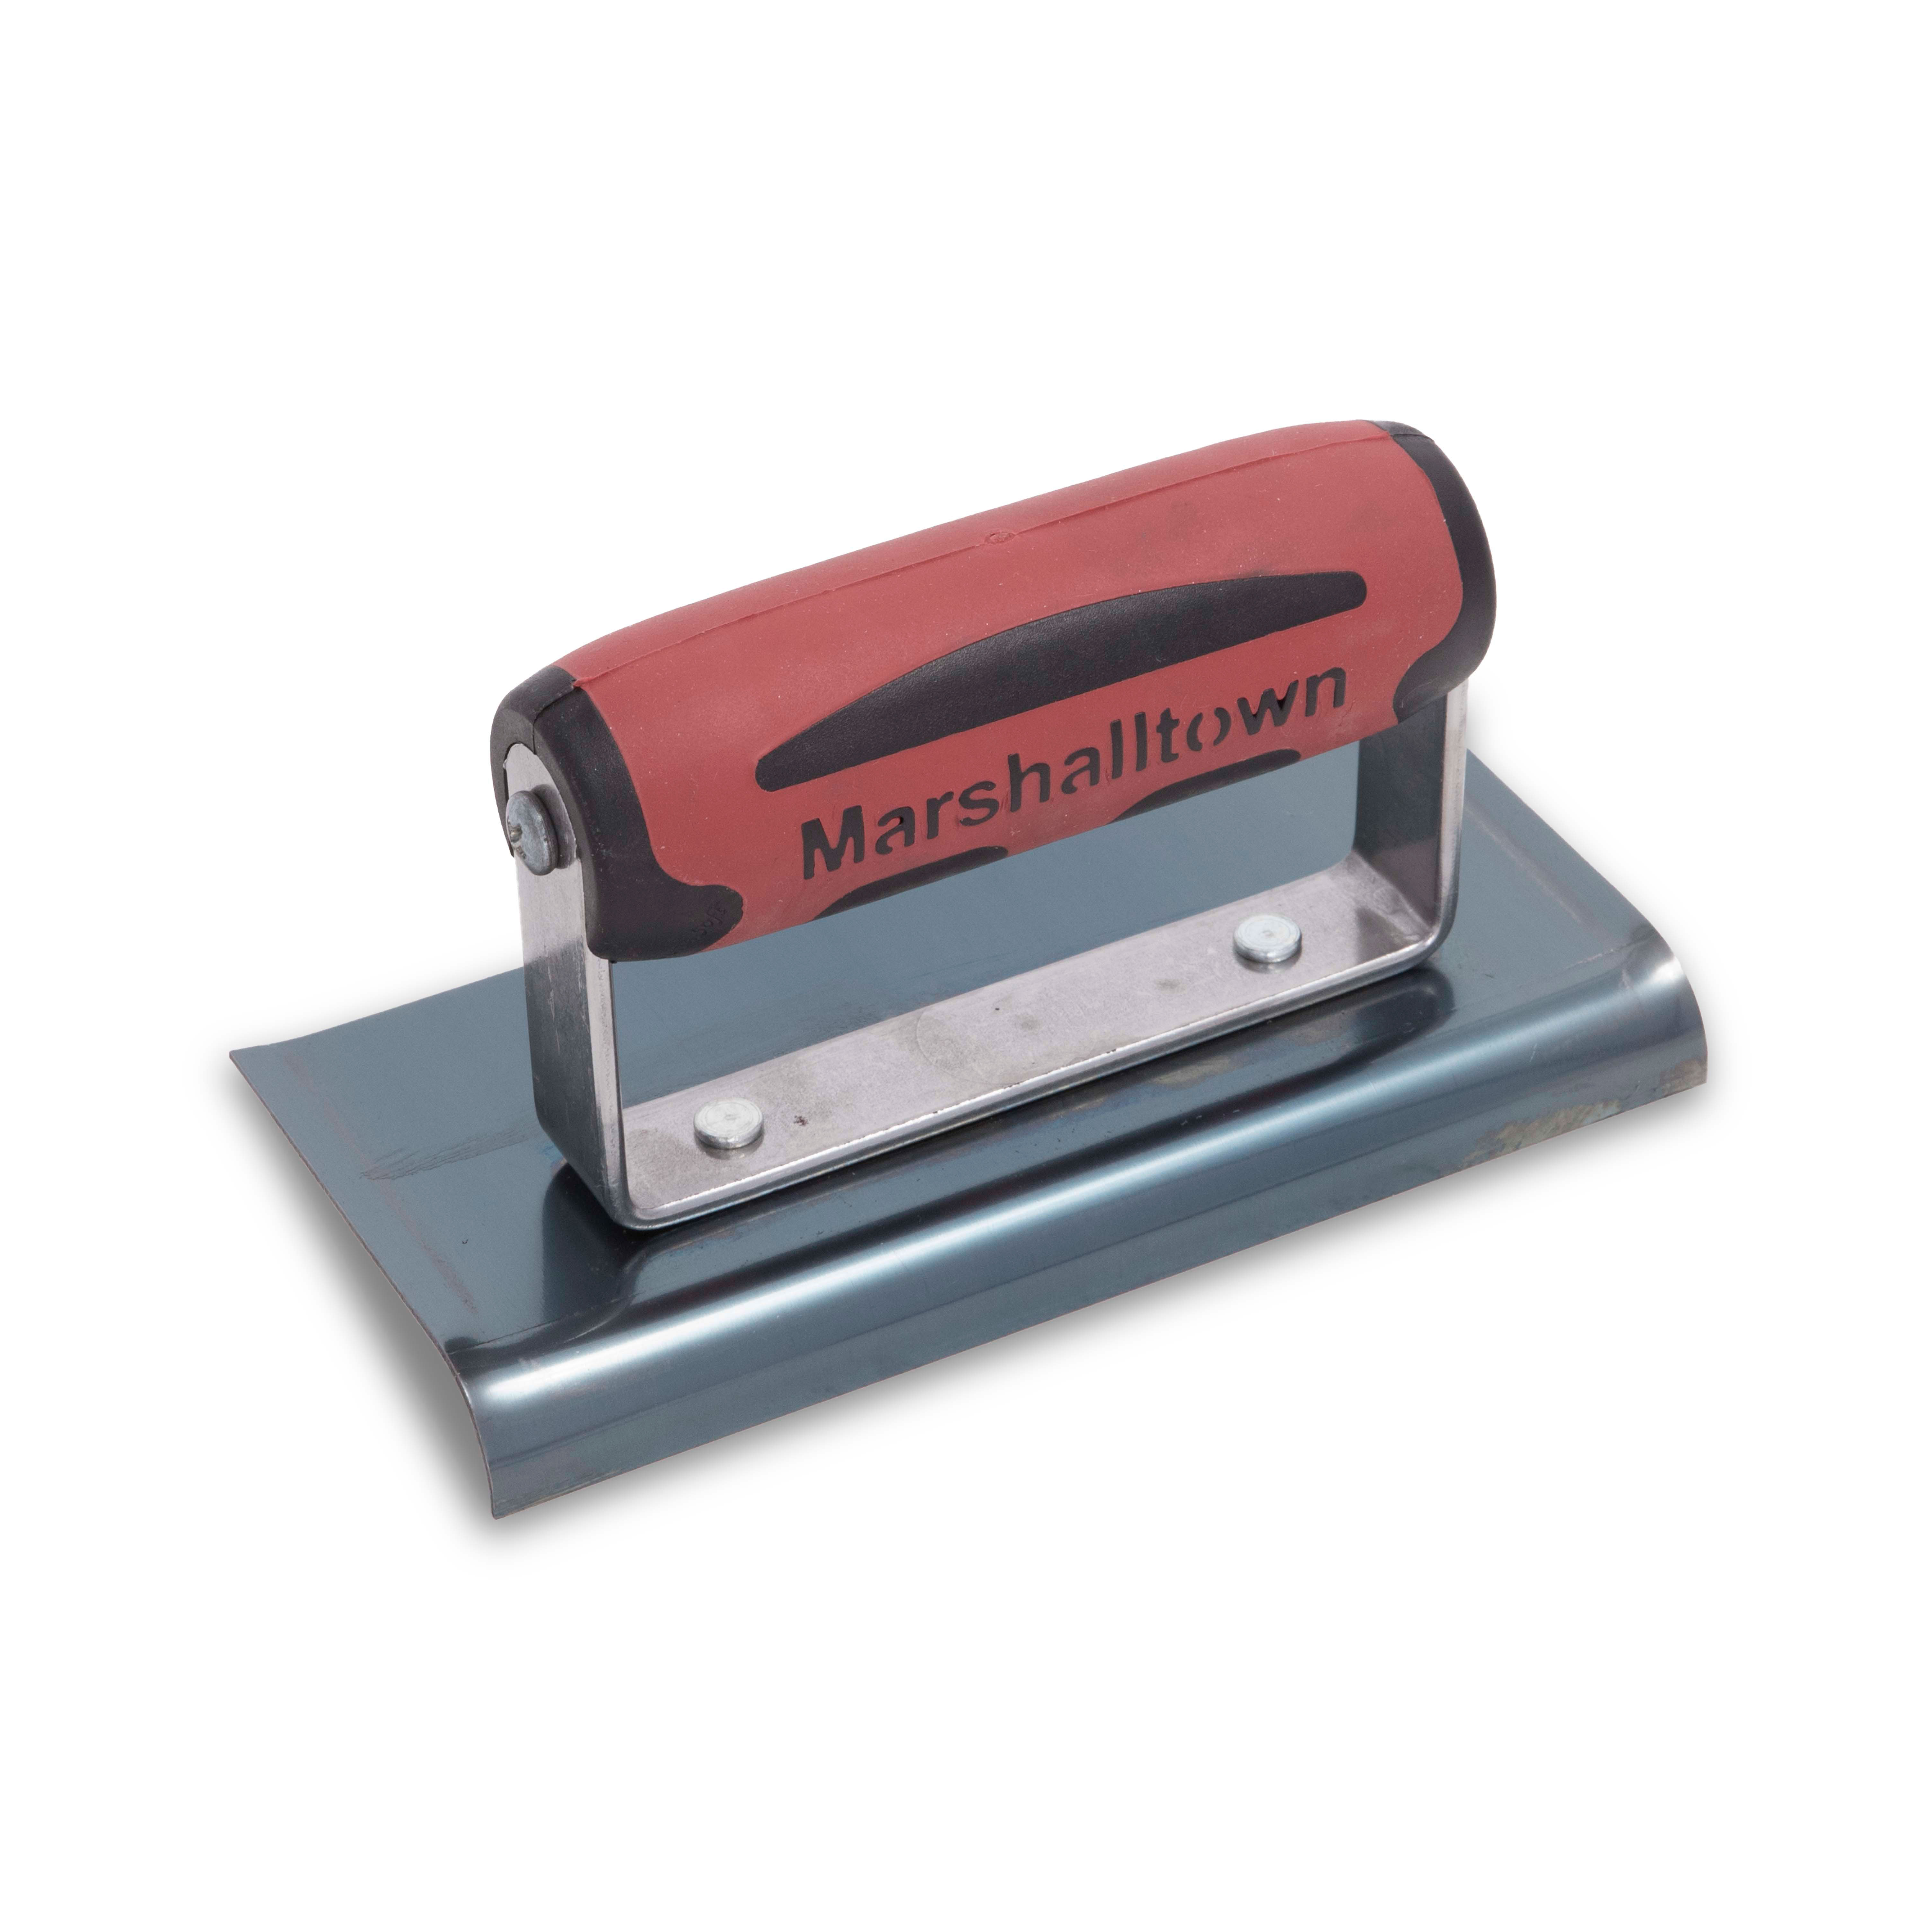 Marshalltown 121BD 6in x 3in Blue Steel Edger-Curved Ends 1/2R, 5/8L-DuraSoft Handle 121BD